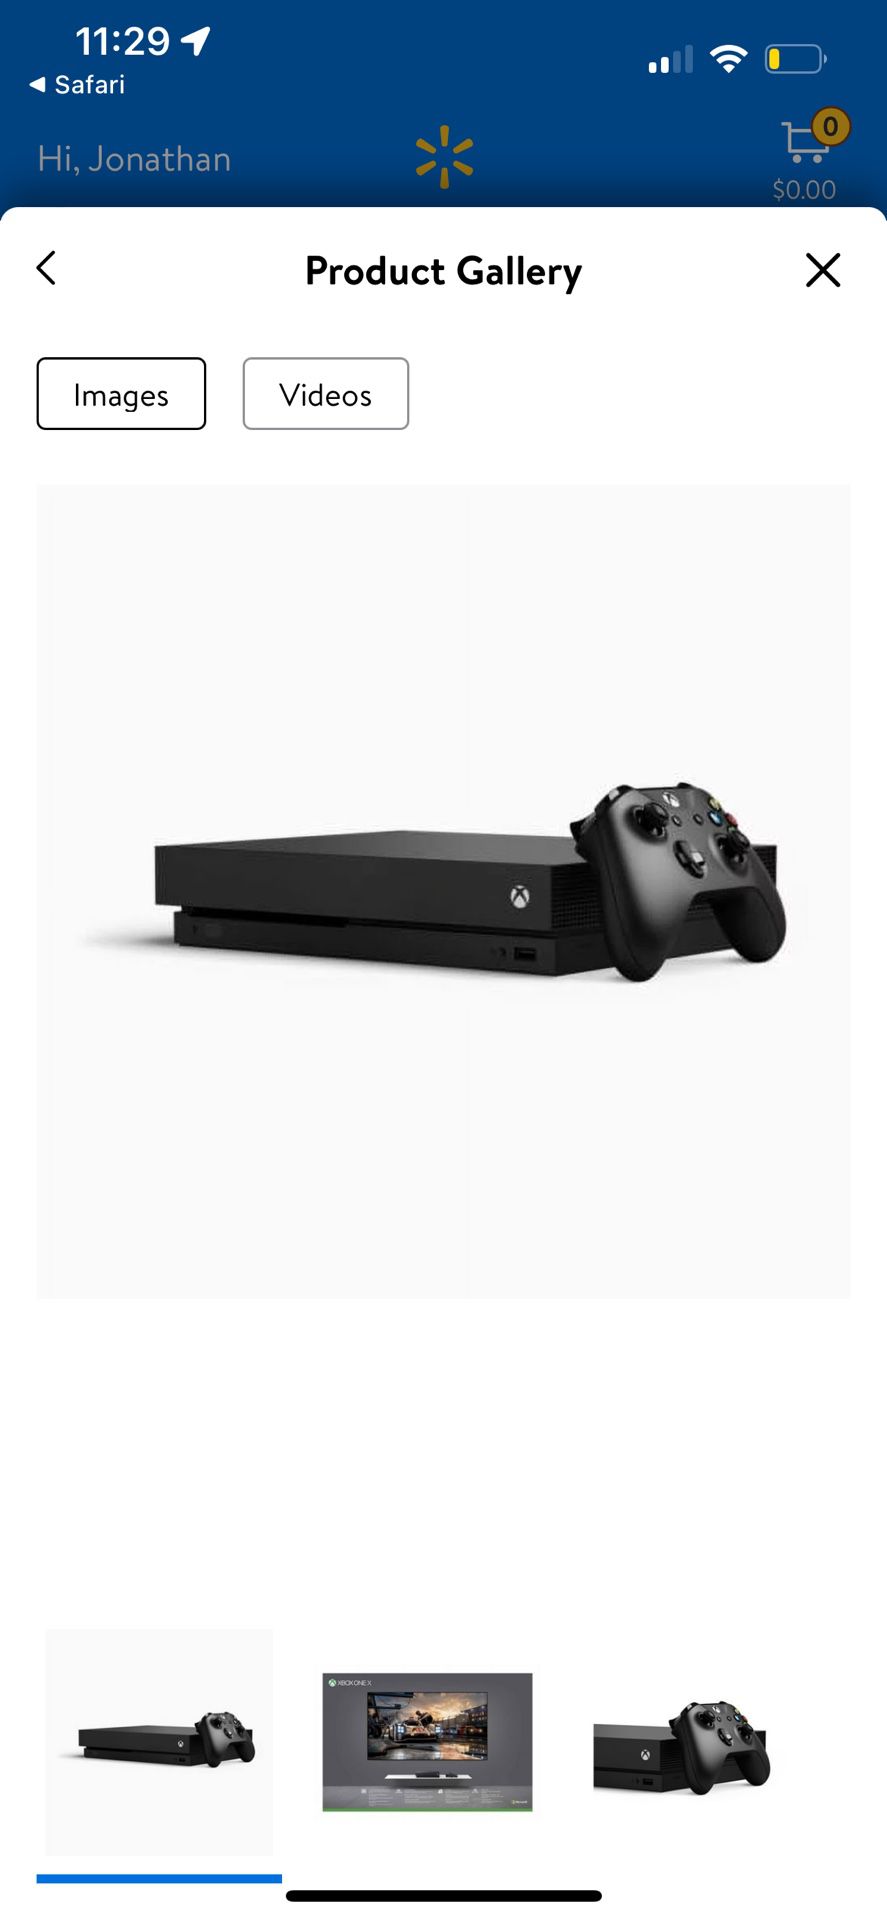 Xbox One X  1 TB W/ Controller And Cords Needed 